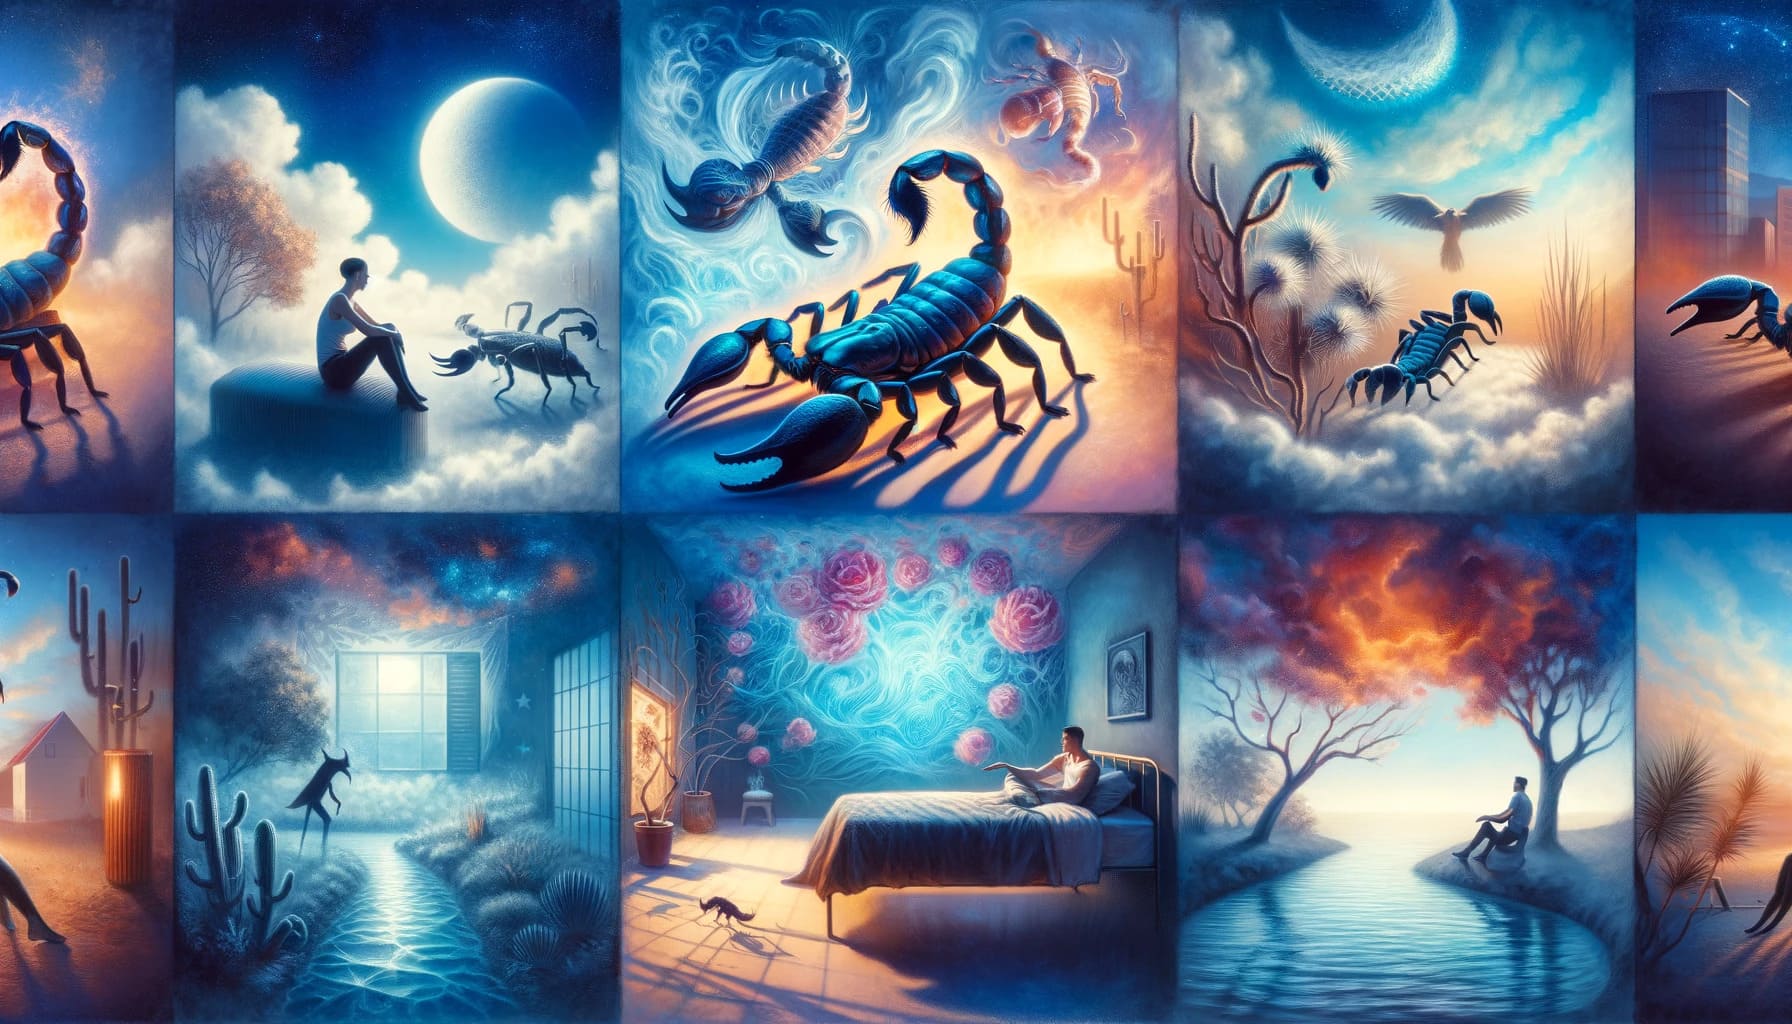 A dream scene with a scorpion in various contexts to represent its spiritual meaning. The scorpion is calm in one part symbolizing self control and r